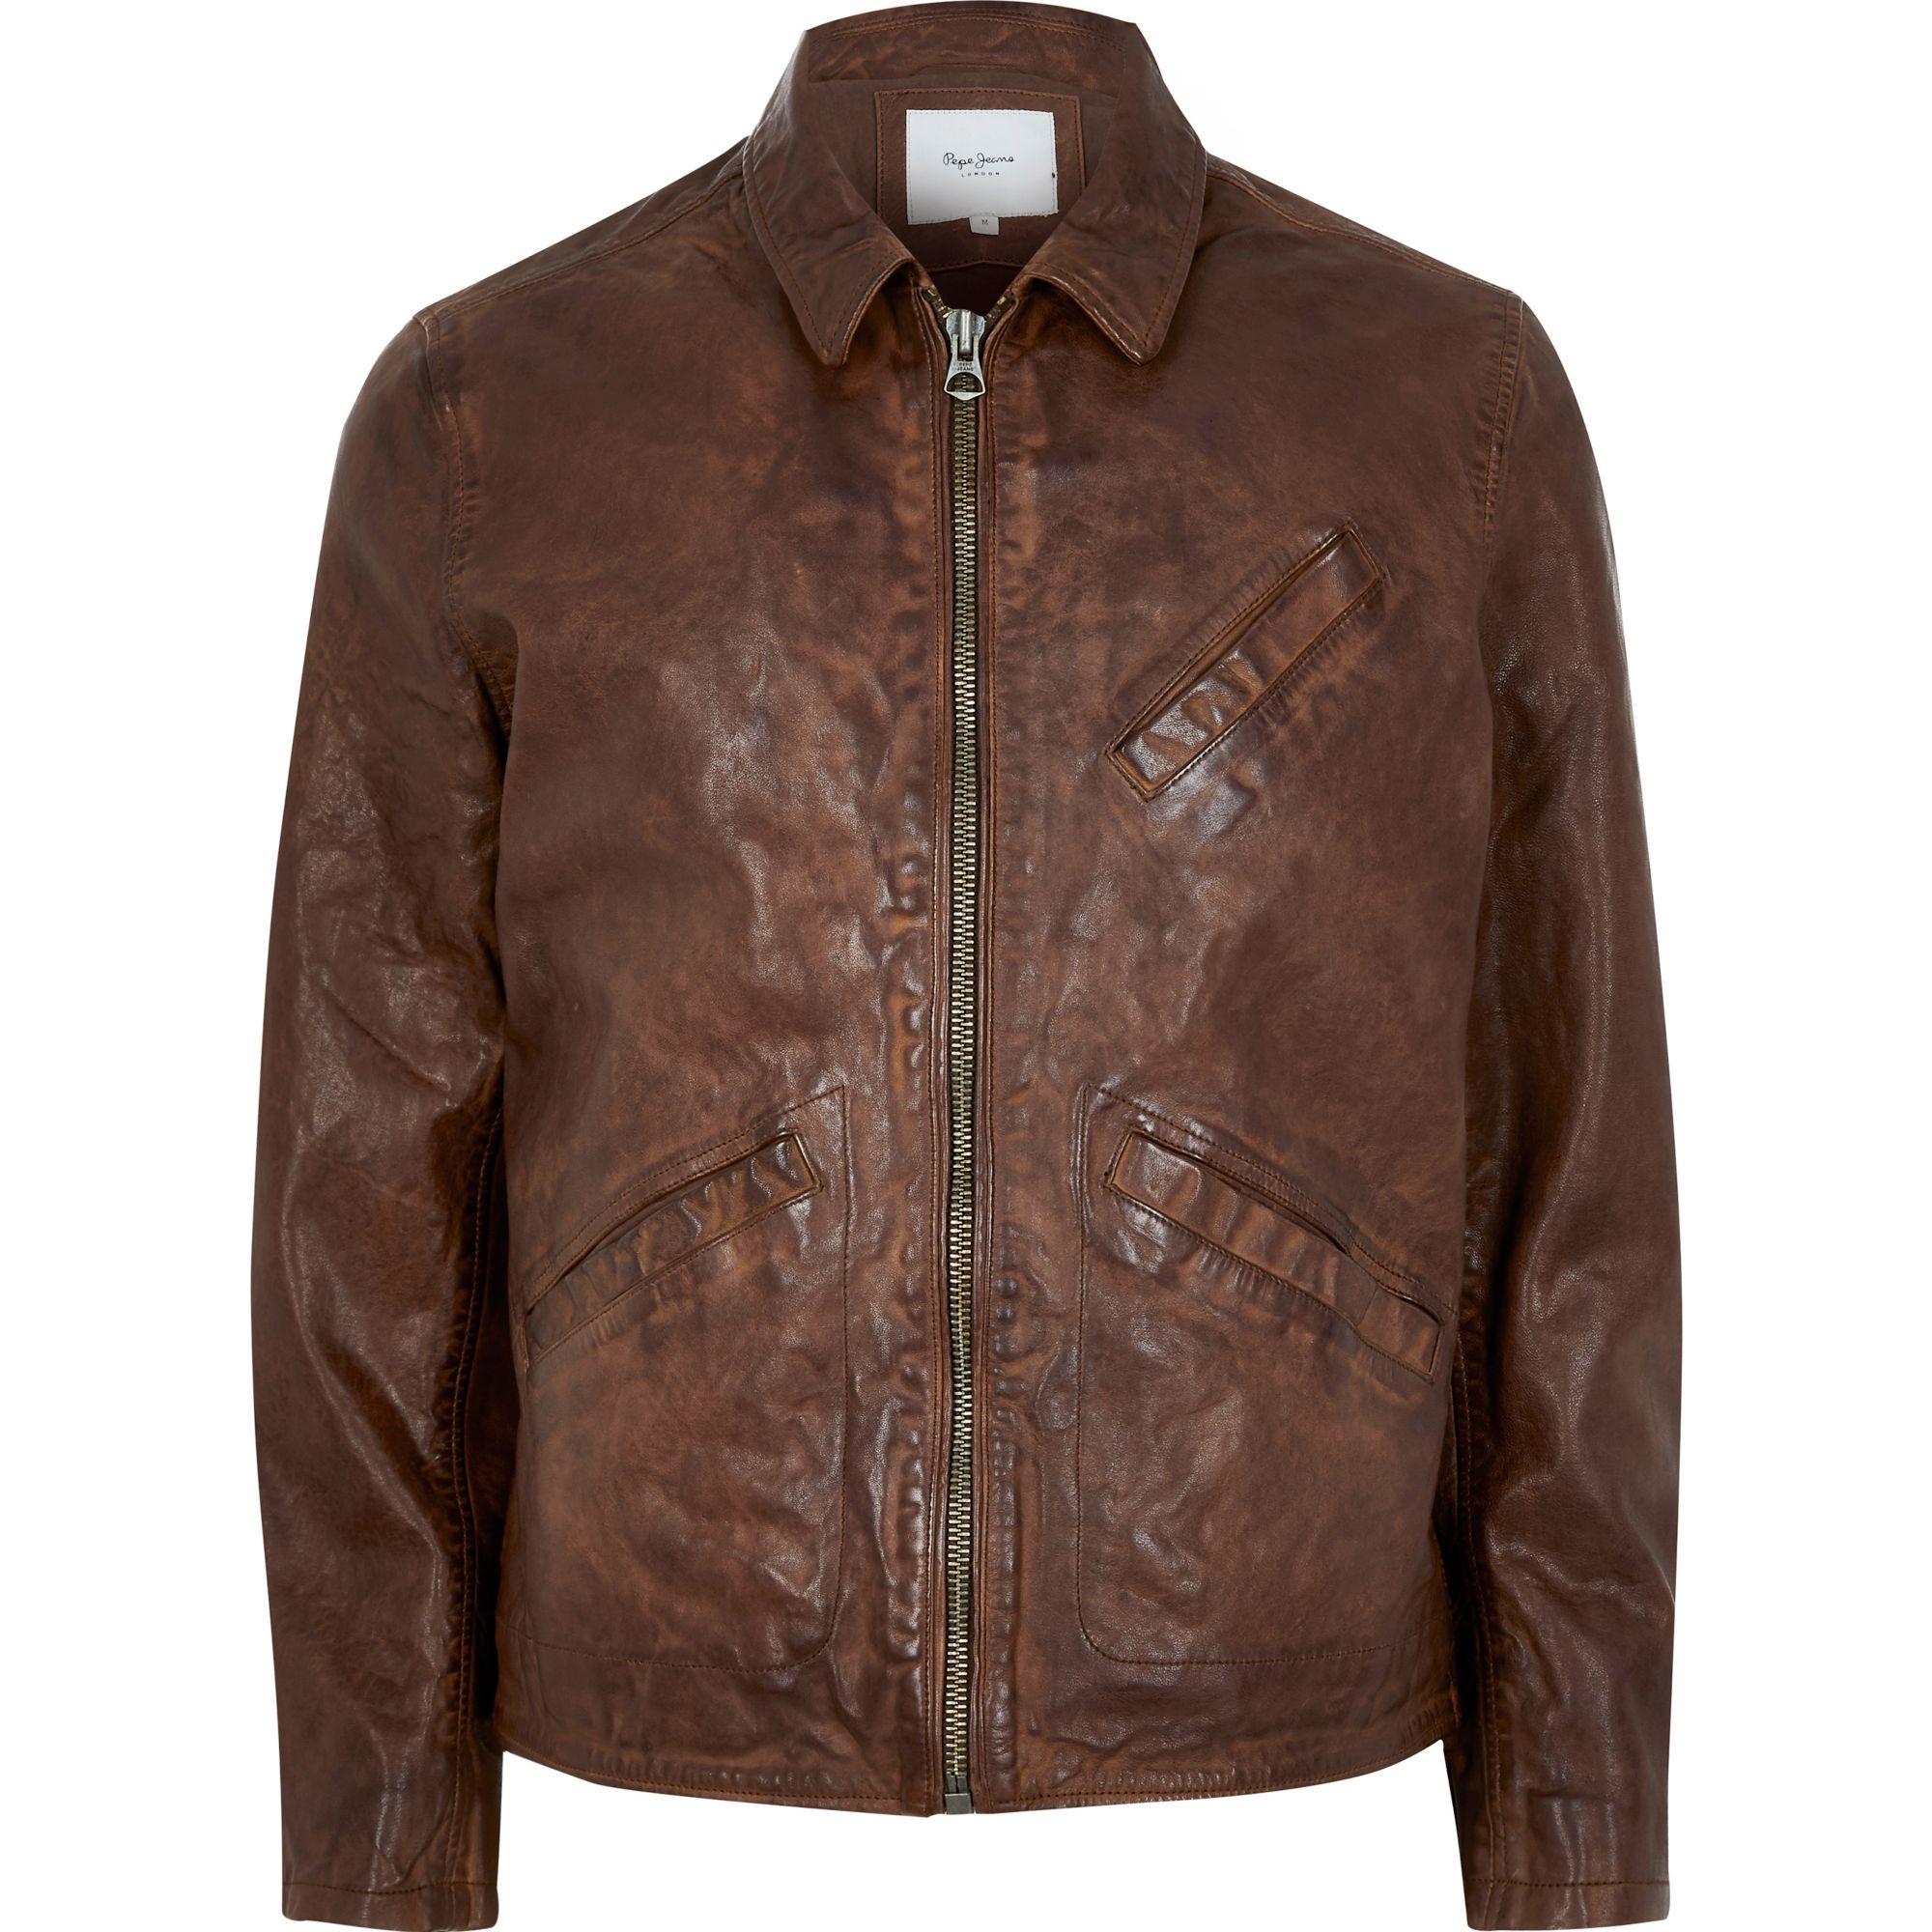 River Island Denim Pepe Jeans Leather Jacket in Brown for Men - Lyst